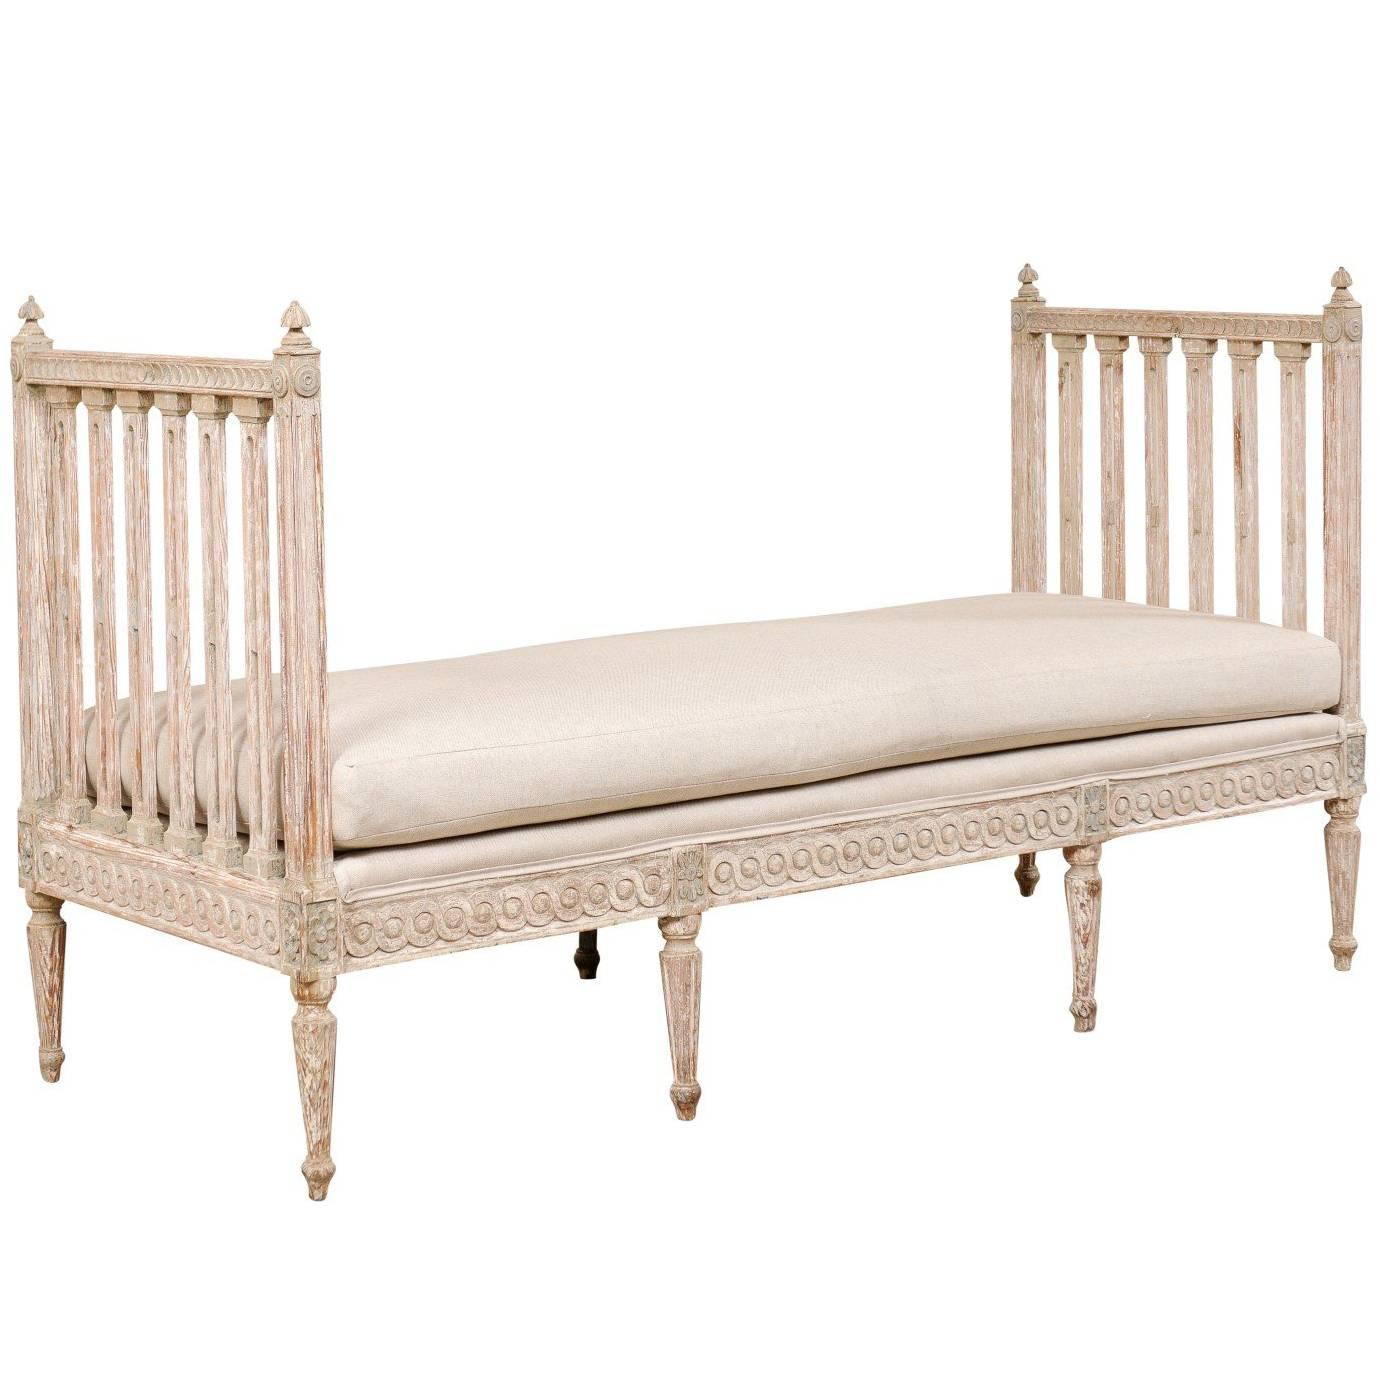 Swedish Period Gustavian Daybed Sofa Bench from the Late 18th Century in Cream